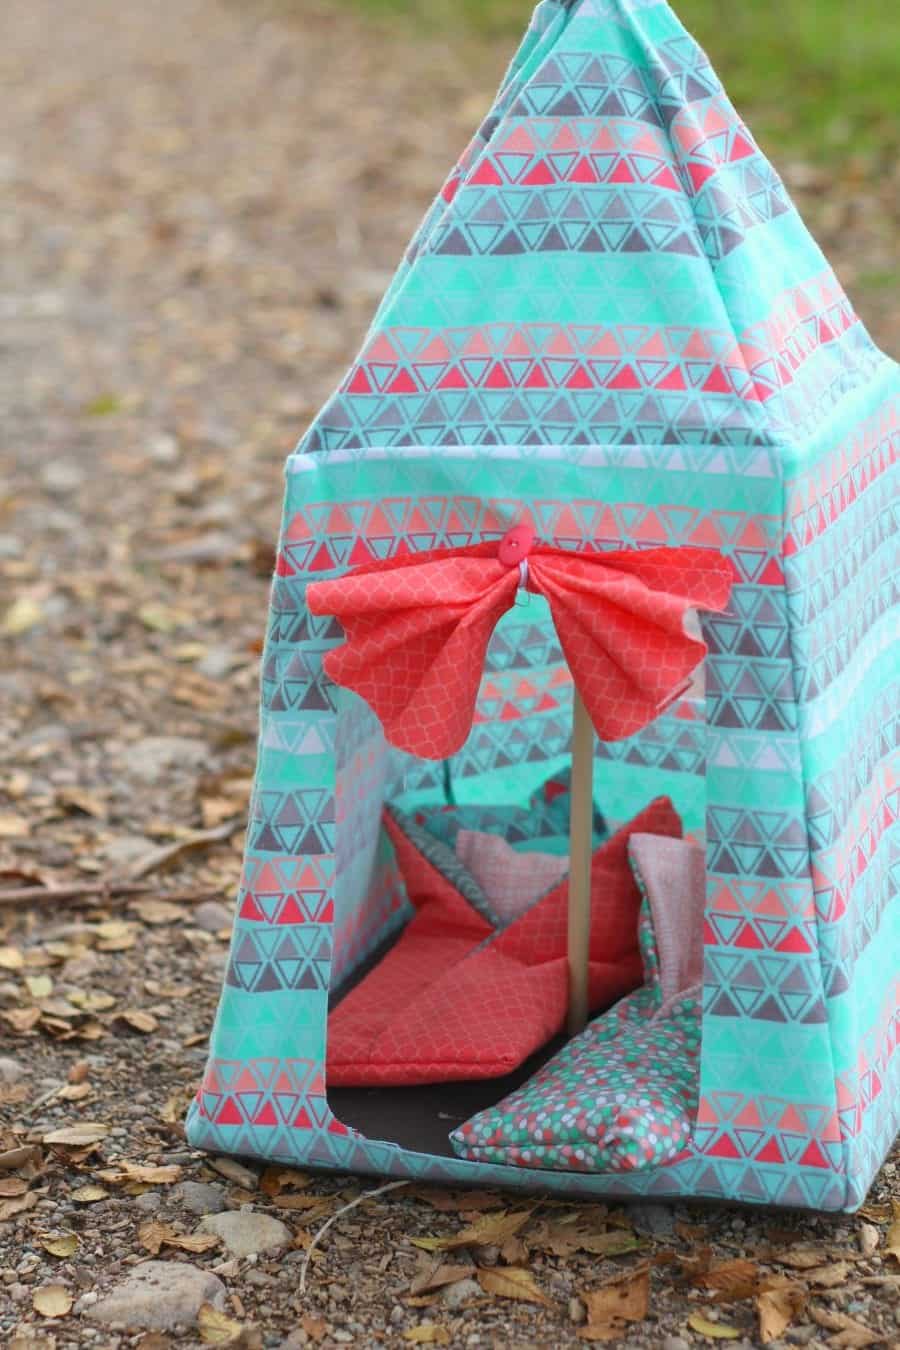 barbie-tent-great-birthday-or-christmas-gift